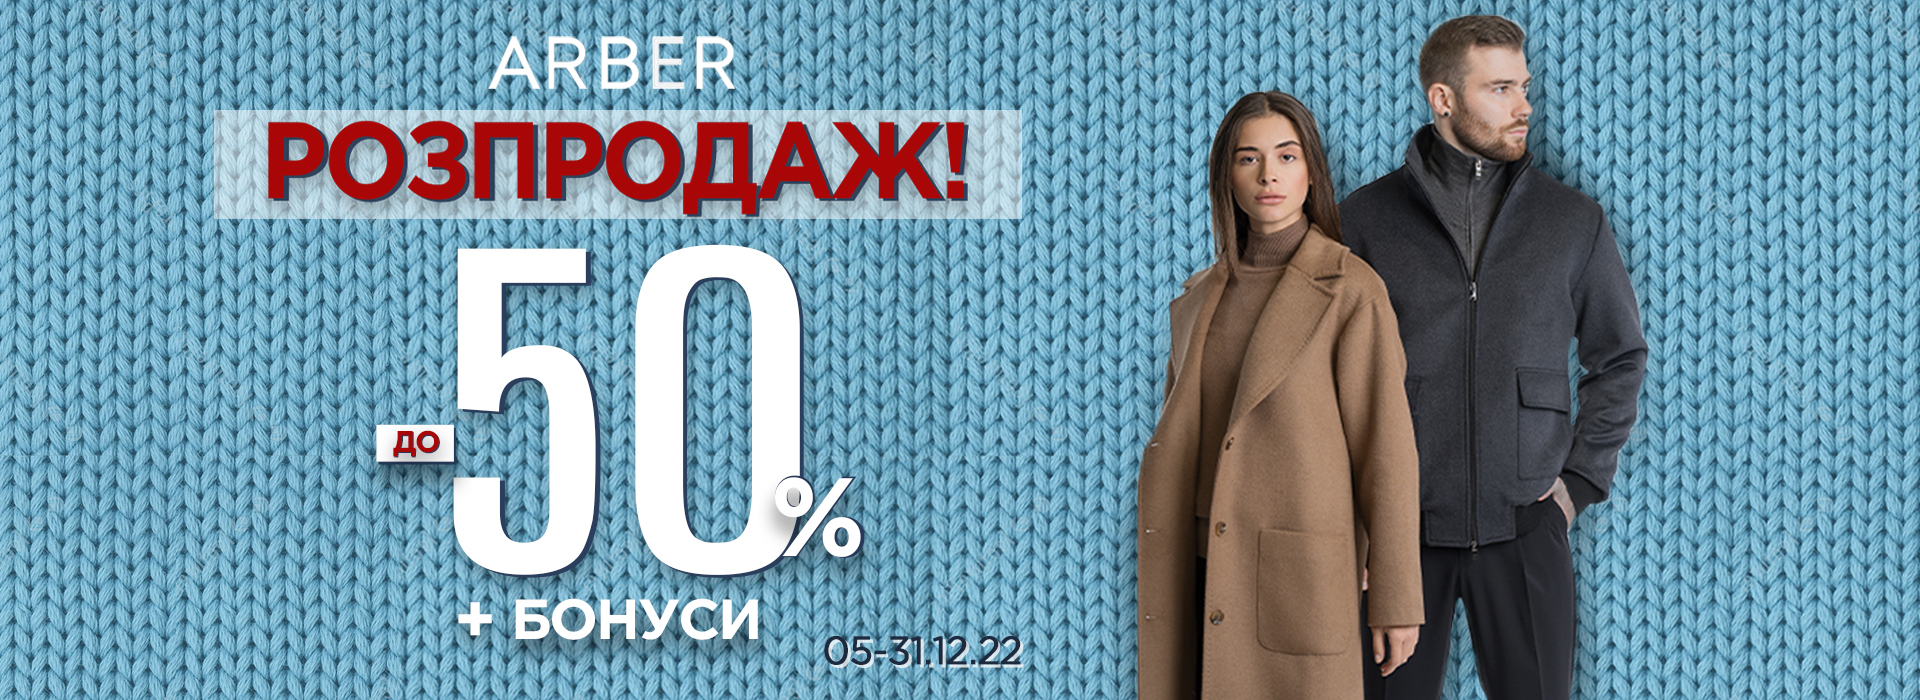 Discounts of up to -50% on collection at ARBER